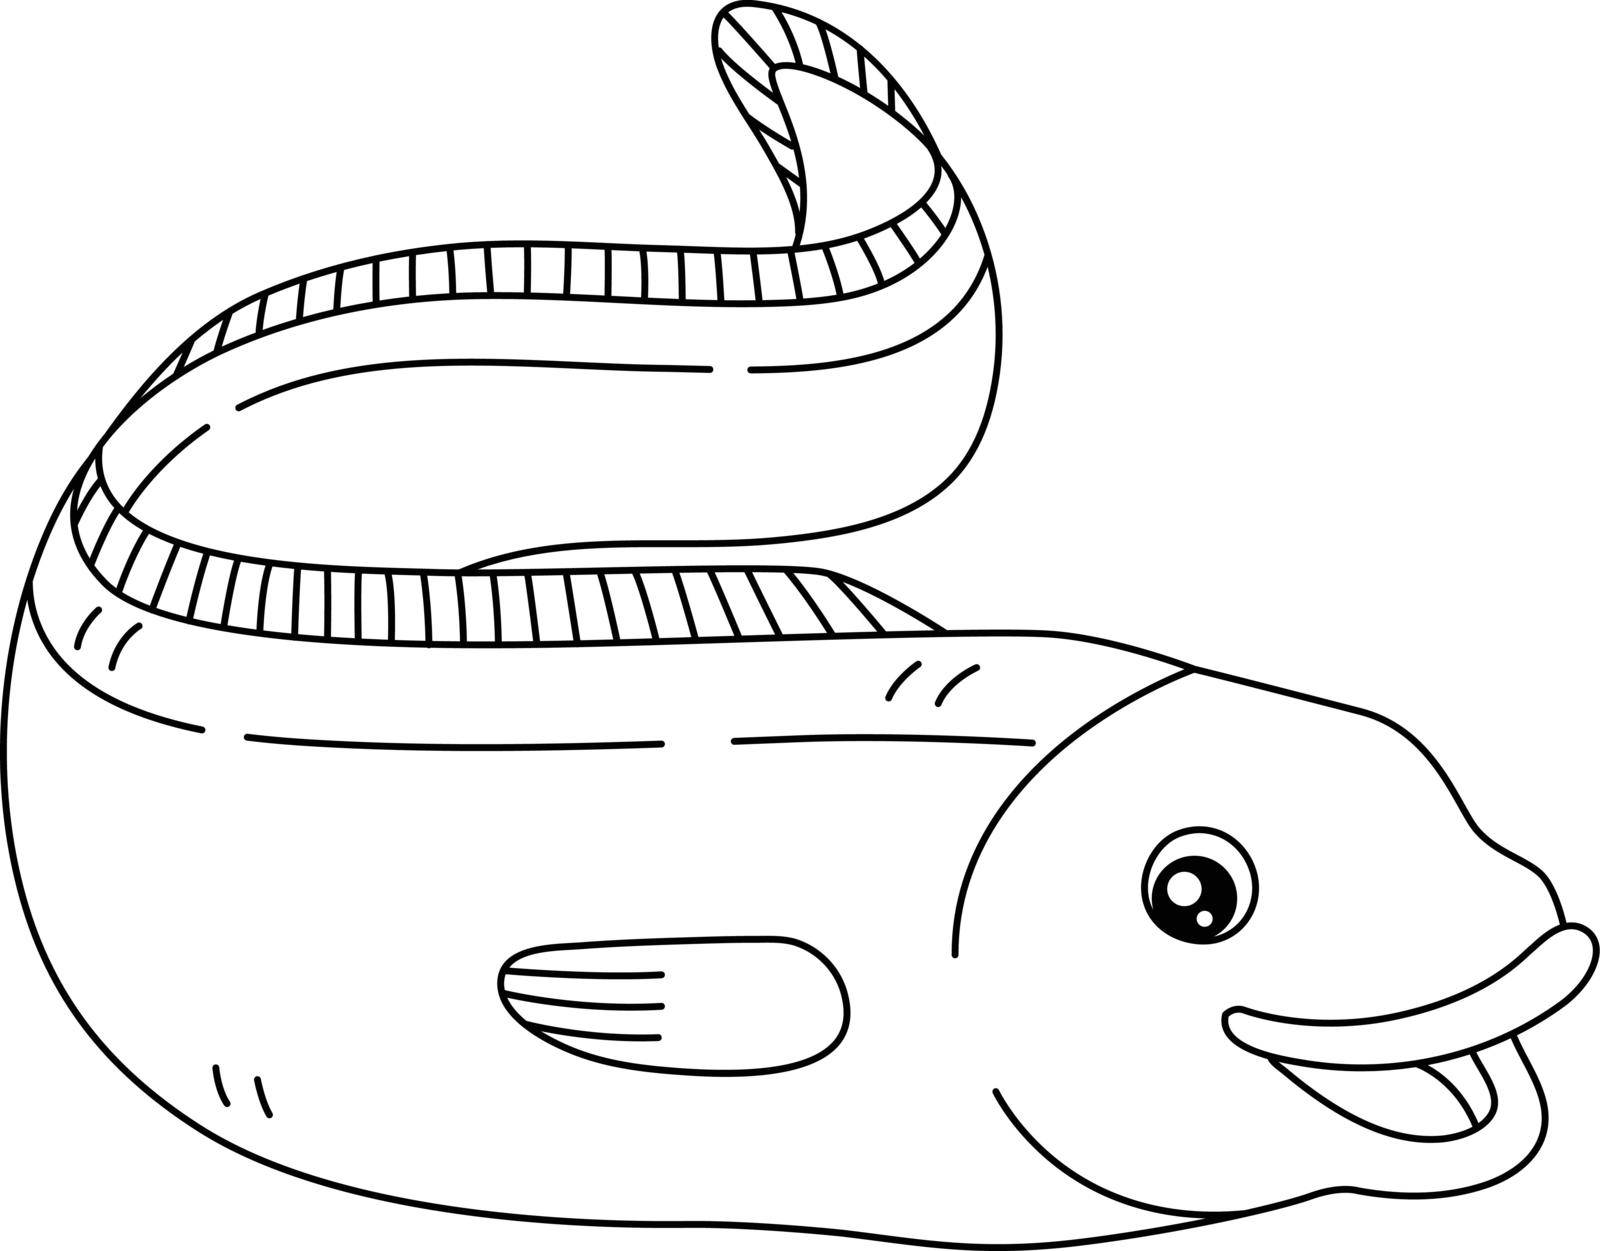 A cute and funny coloring page of an eel. Provides hours of coloring fun for children. To color, this page is very easy. Suitable for little kids and toddlers.